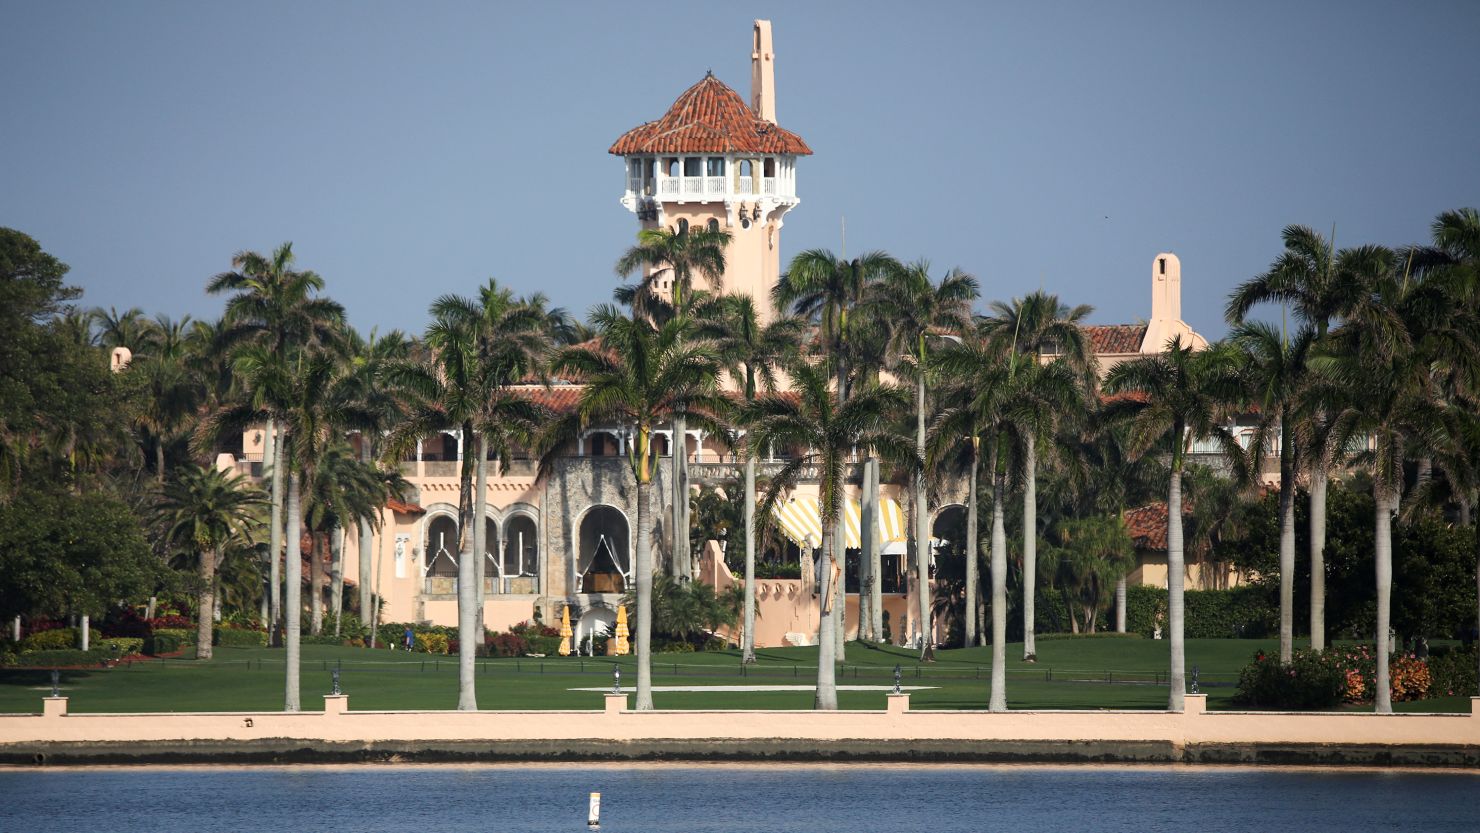 Former U.S. President Donald Trump's Mar-a-Lago residence and resort in Palm Beach, Florida.